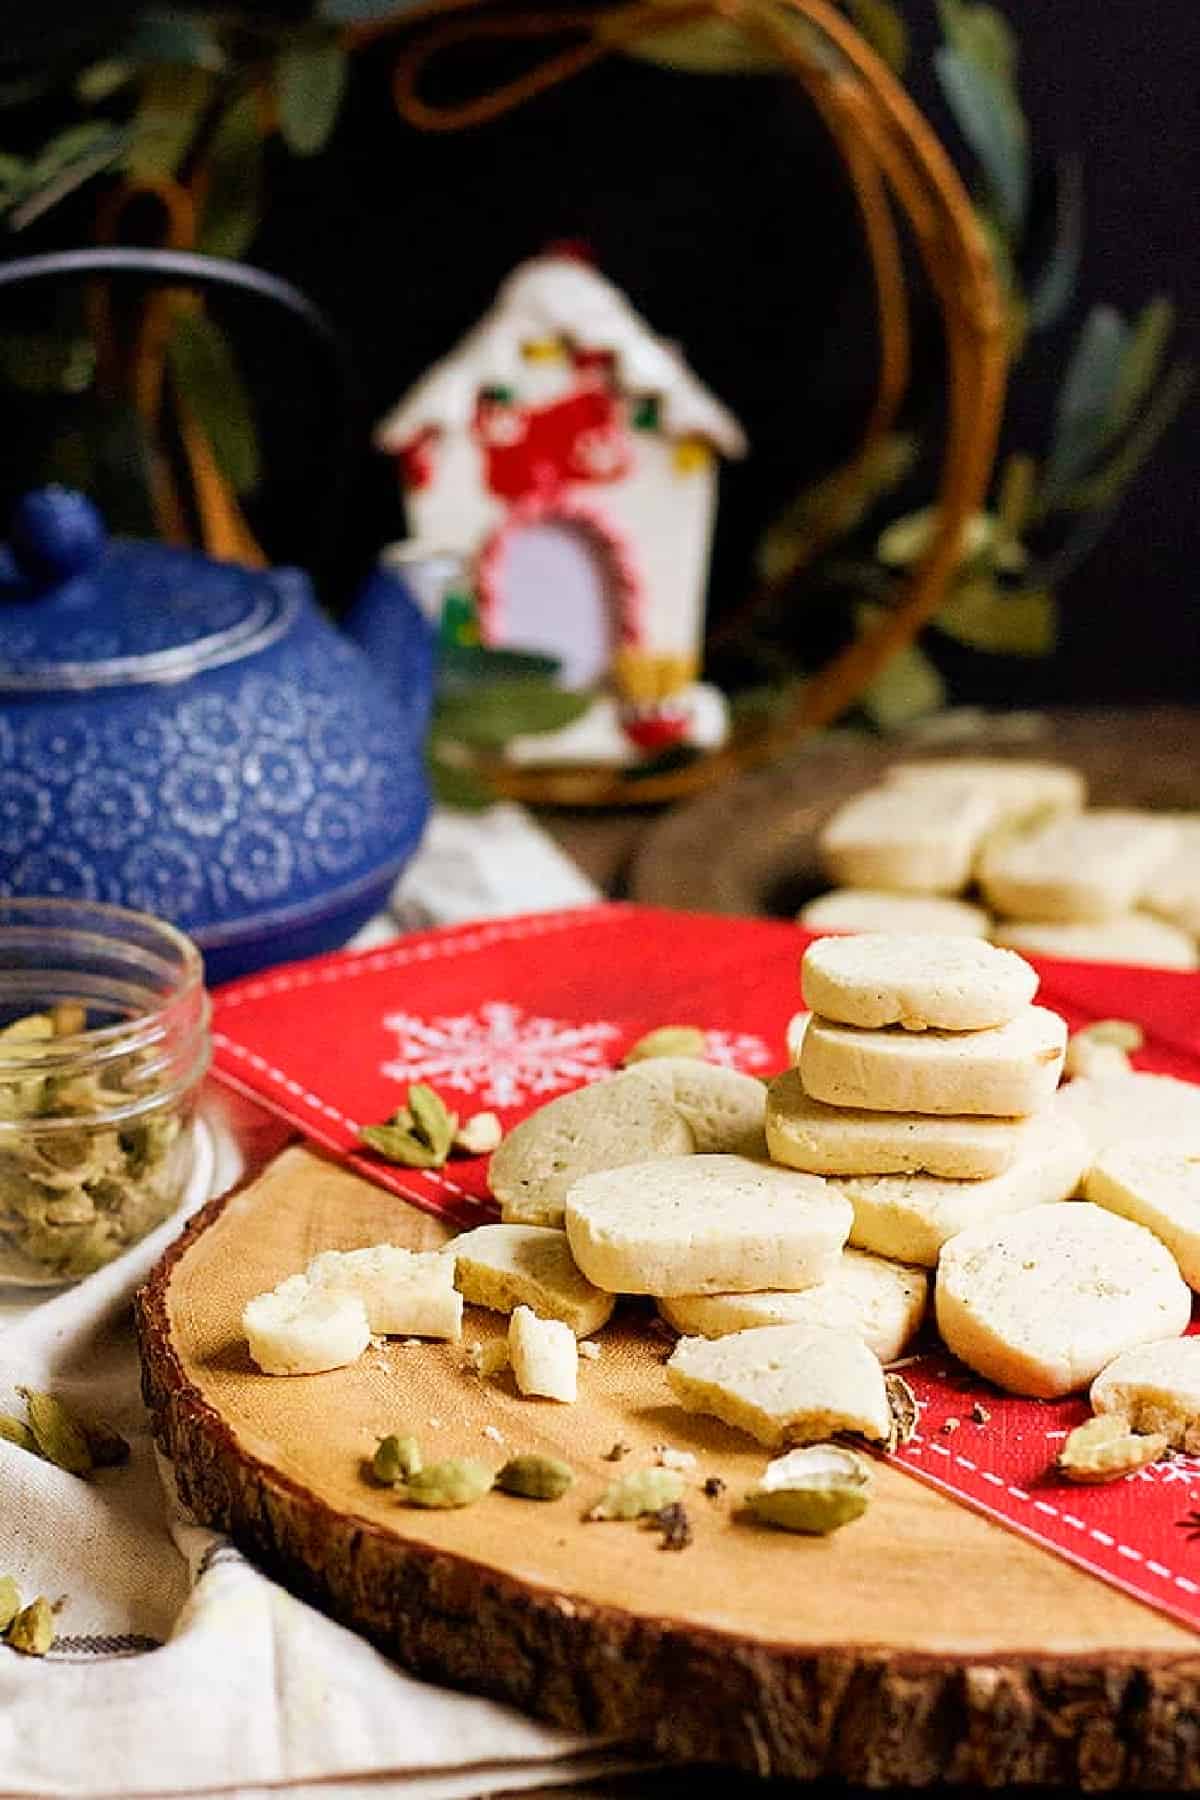 Cardamom cookies are perfect for any time of the year, these tender shortbread cookies with a hint of cardamom are so delicious!